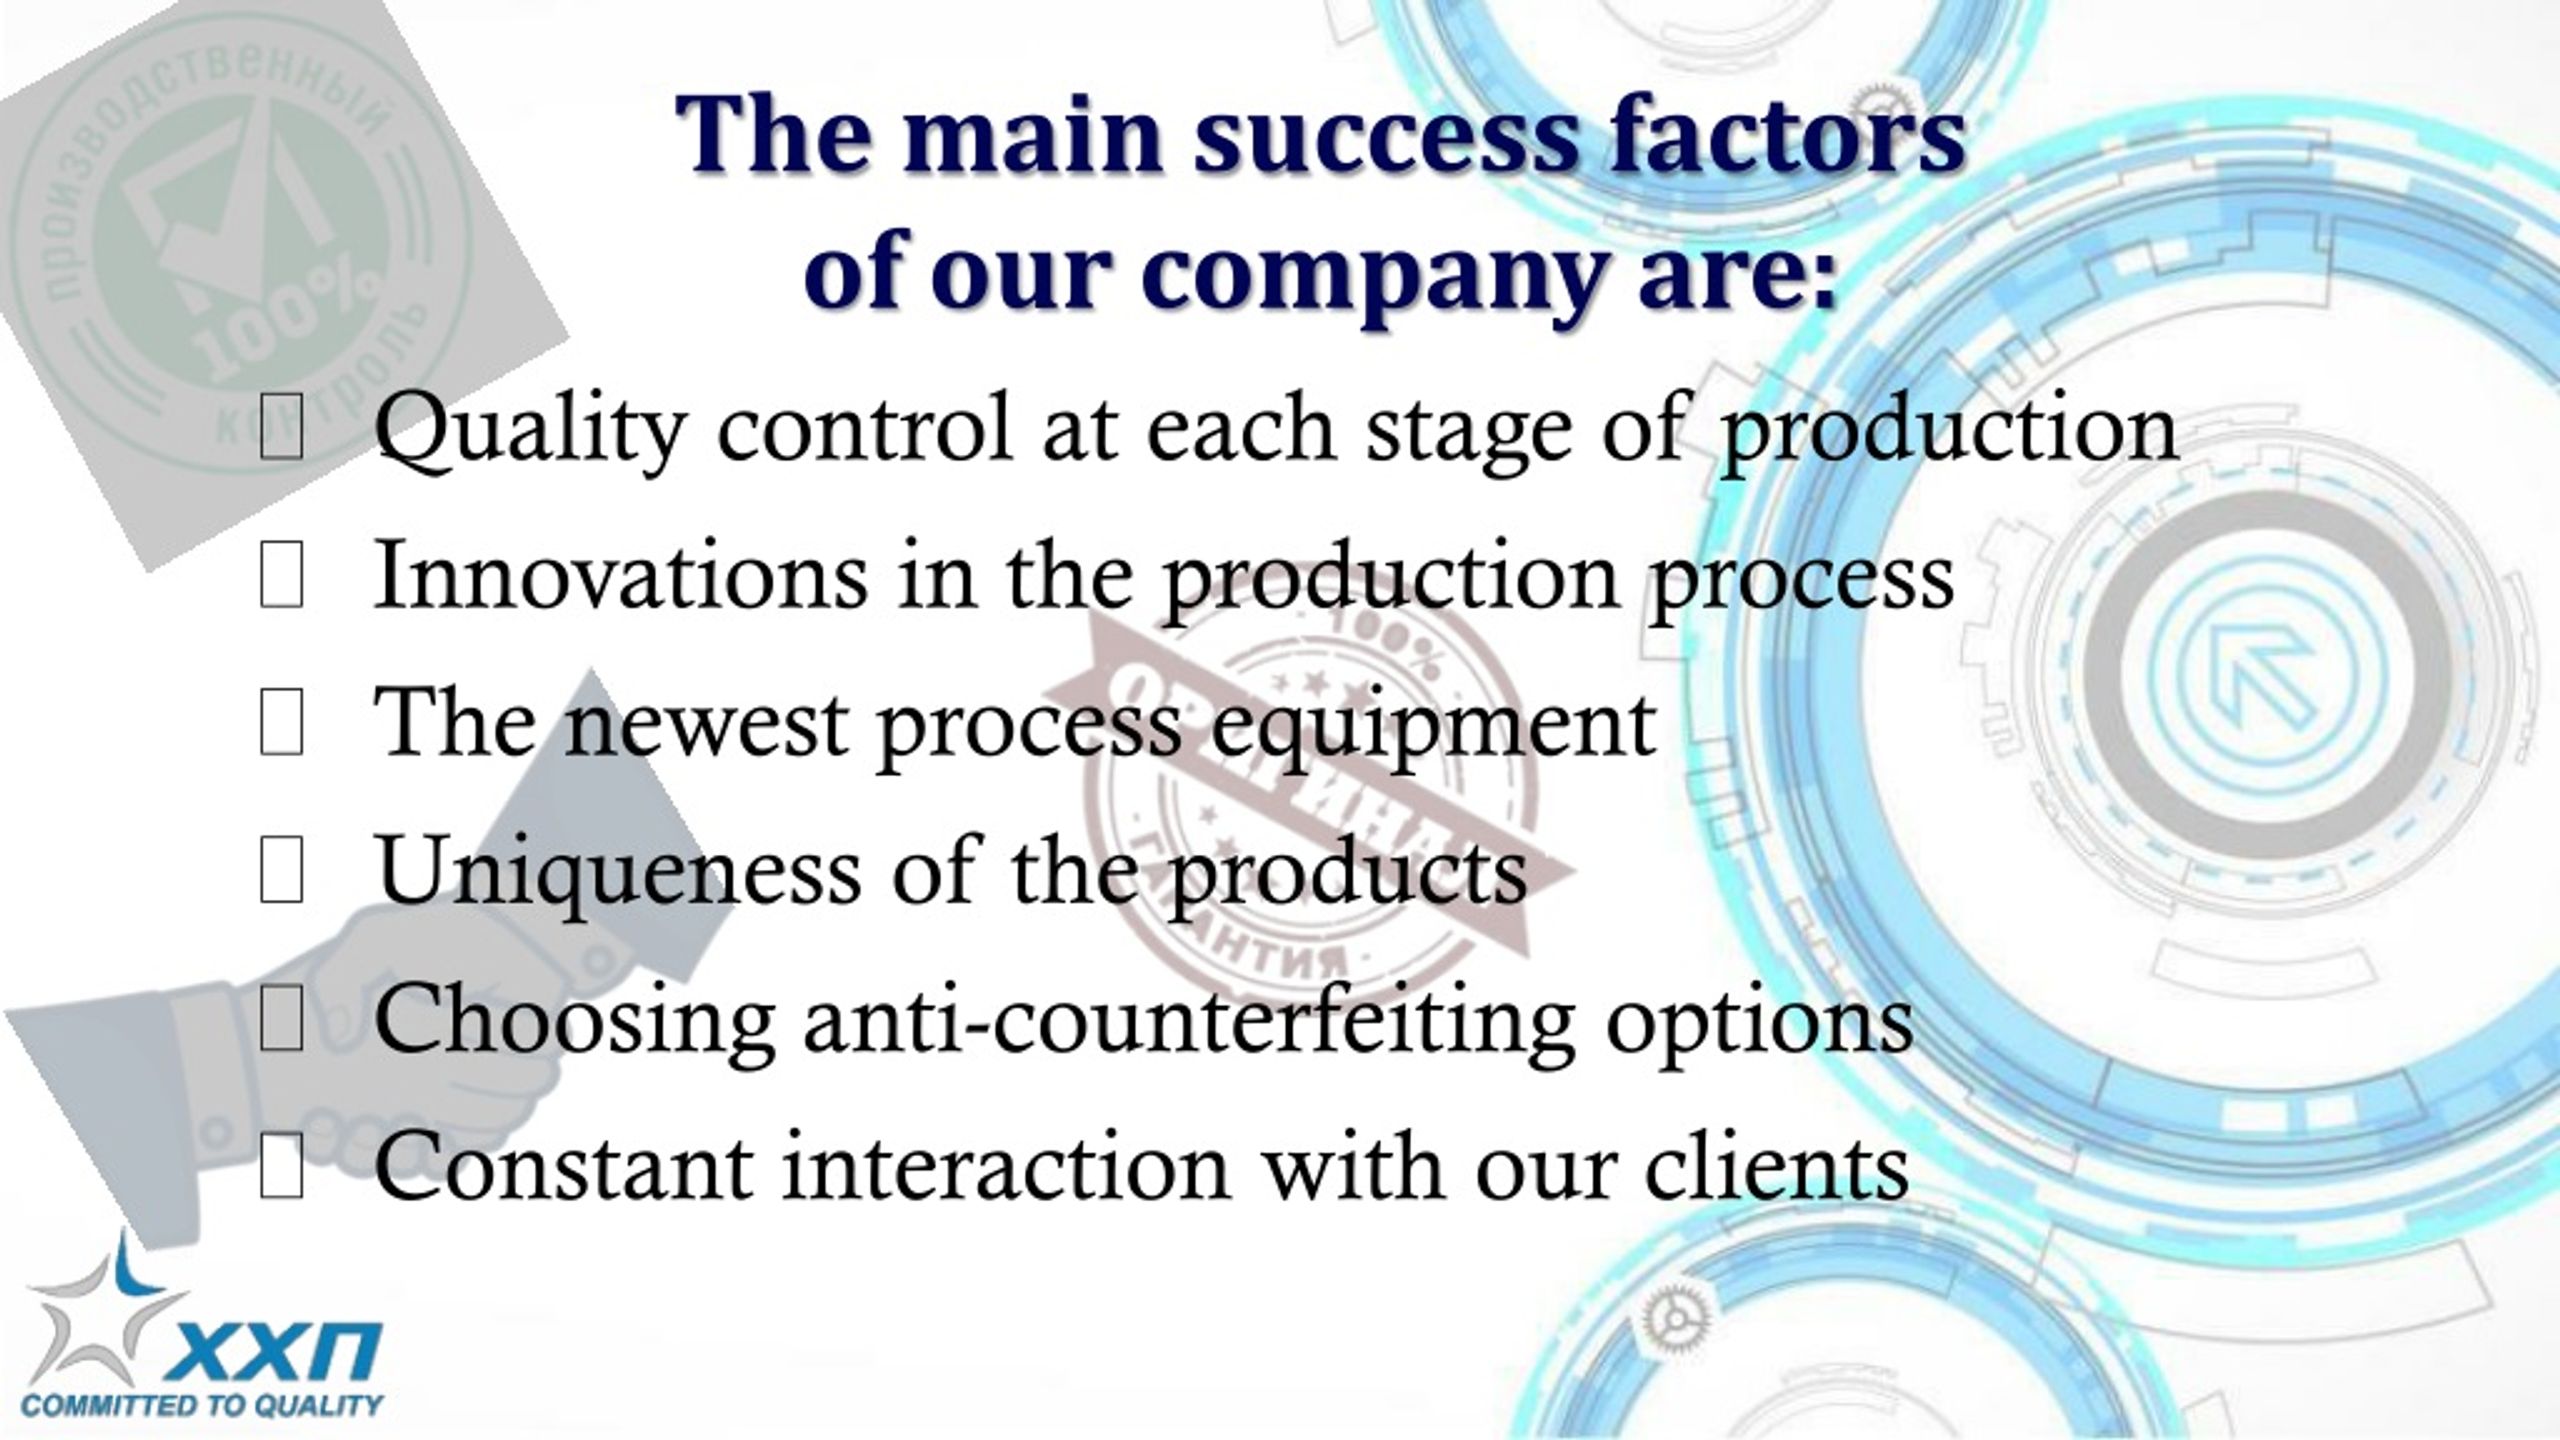 https://image4.slideserve.com/1183461/the-main-success-factors-of-our-company-are-l.jpg